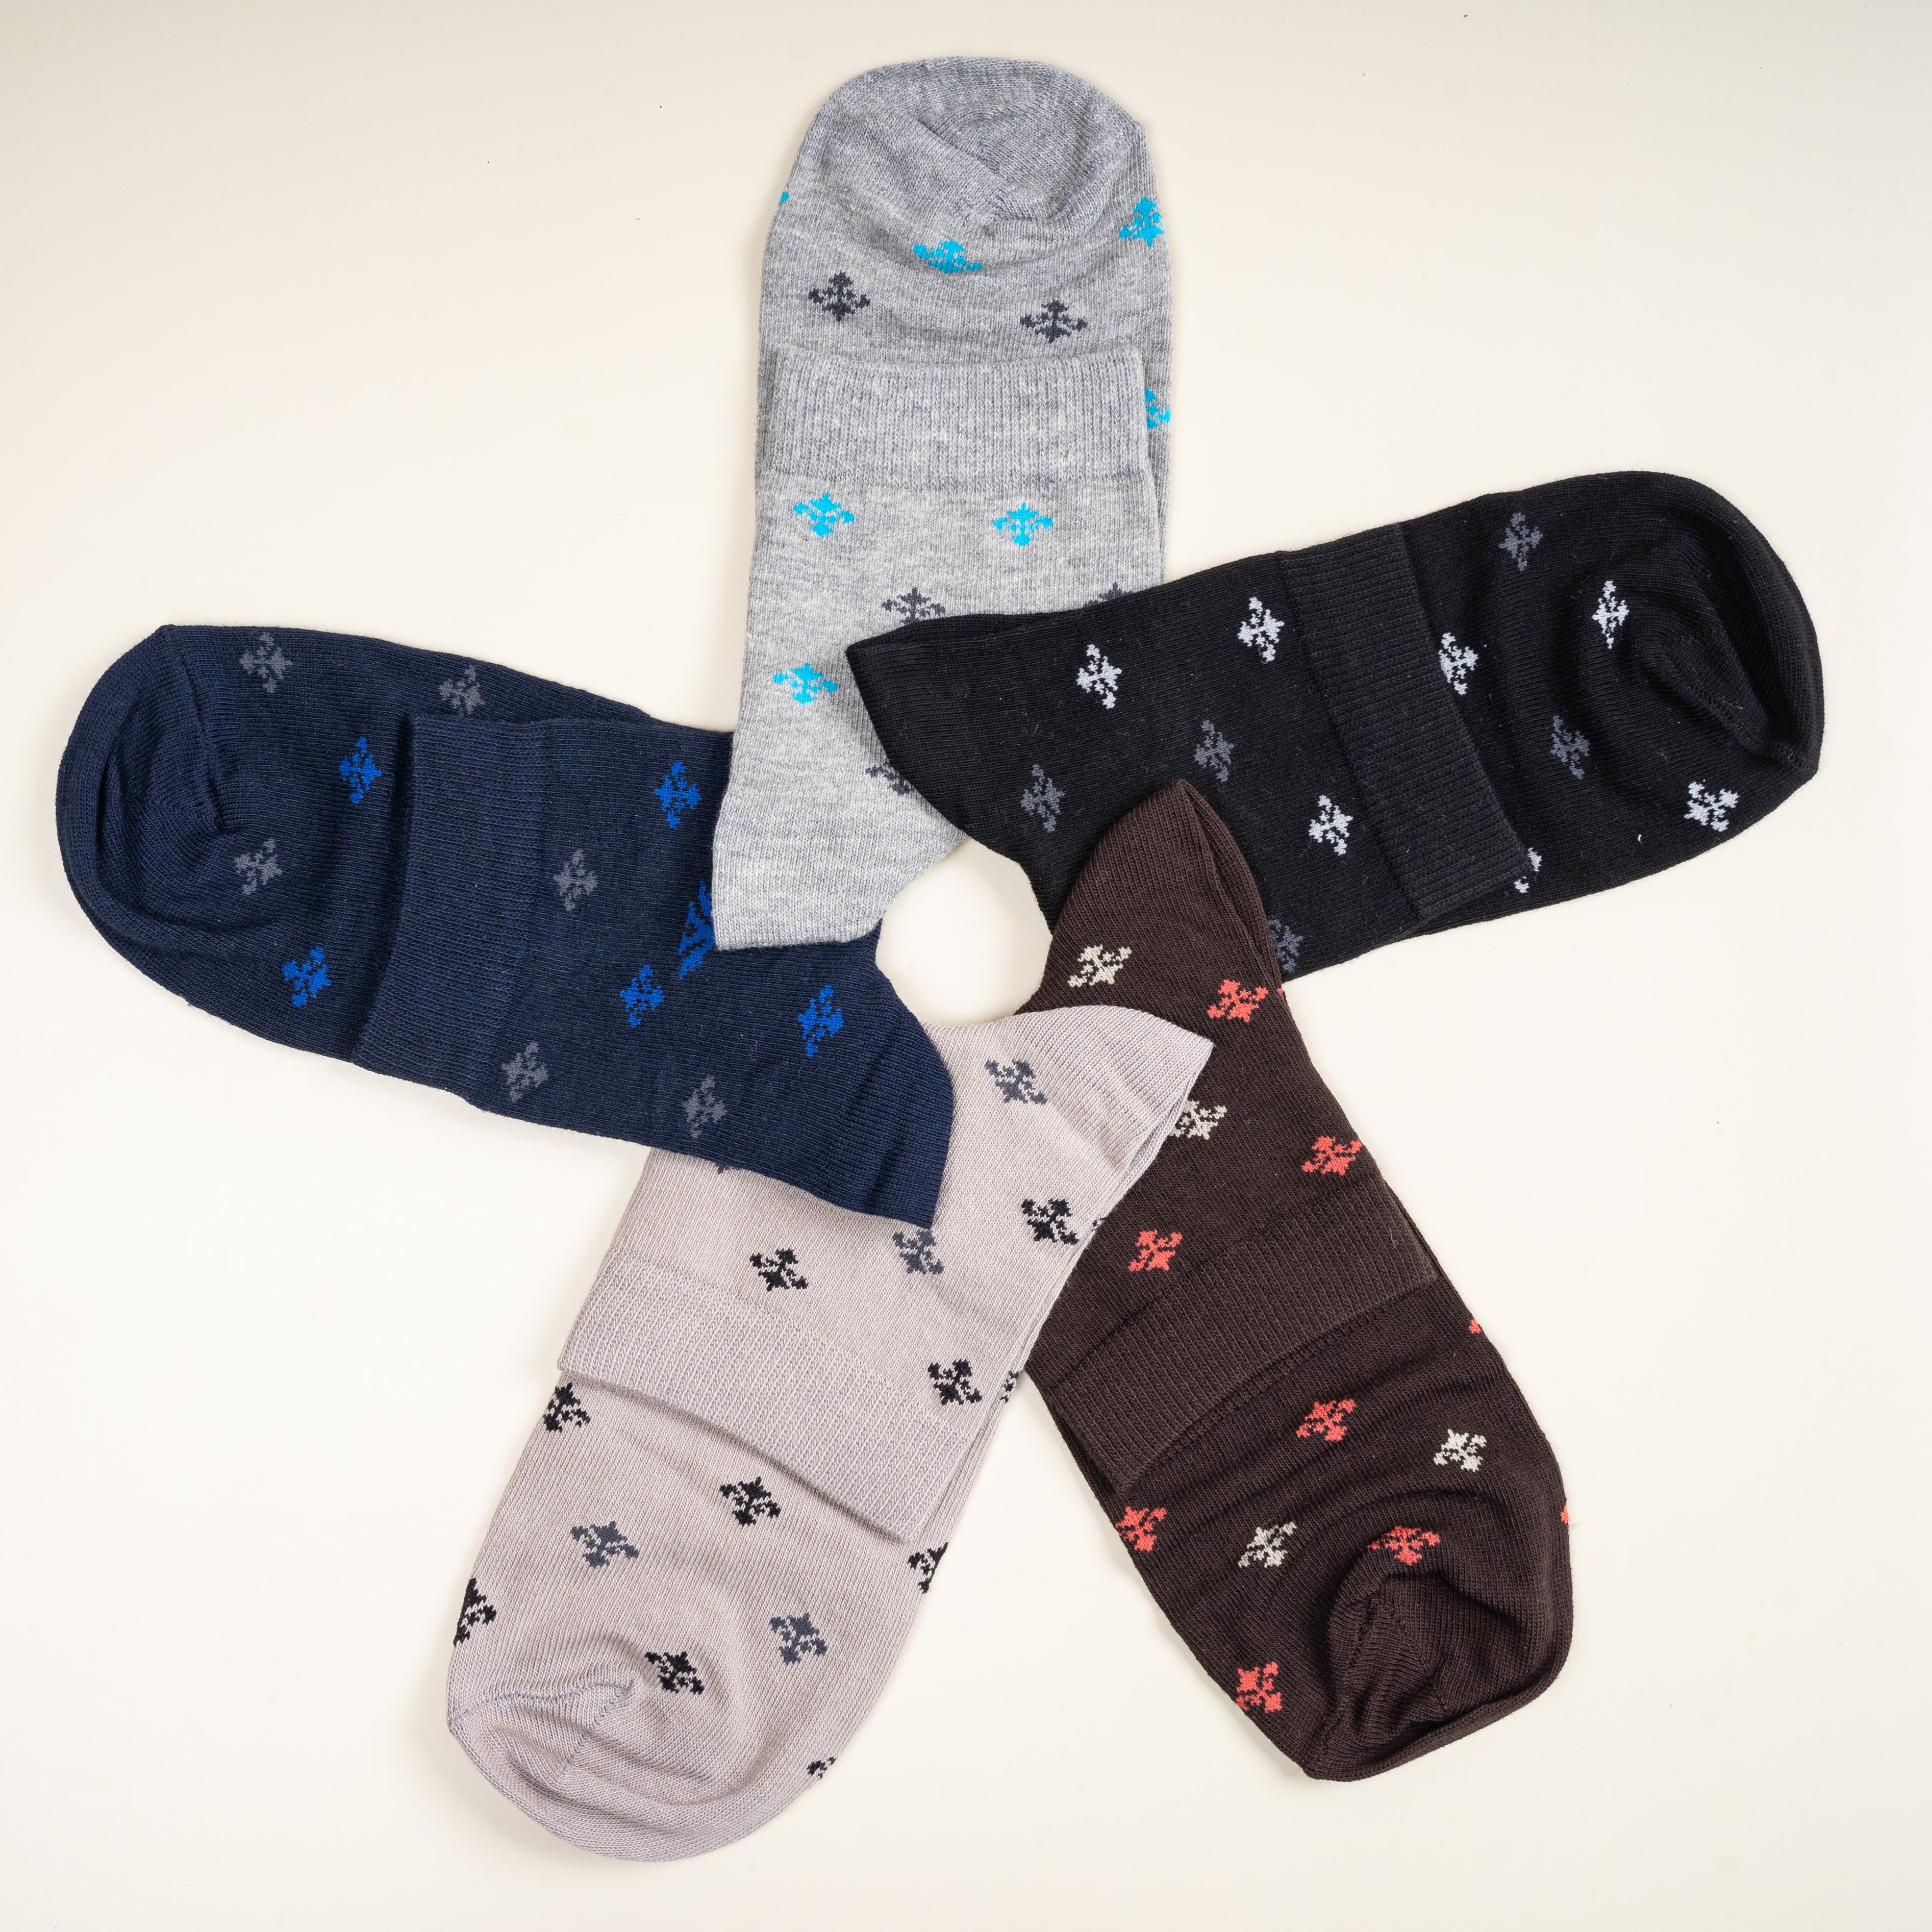 Young Wings Men's Multi Colour Cotton Fabric Design Ankle Length Socks - Pack of 5, Style no. 2722-M1